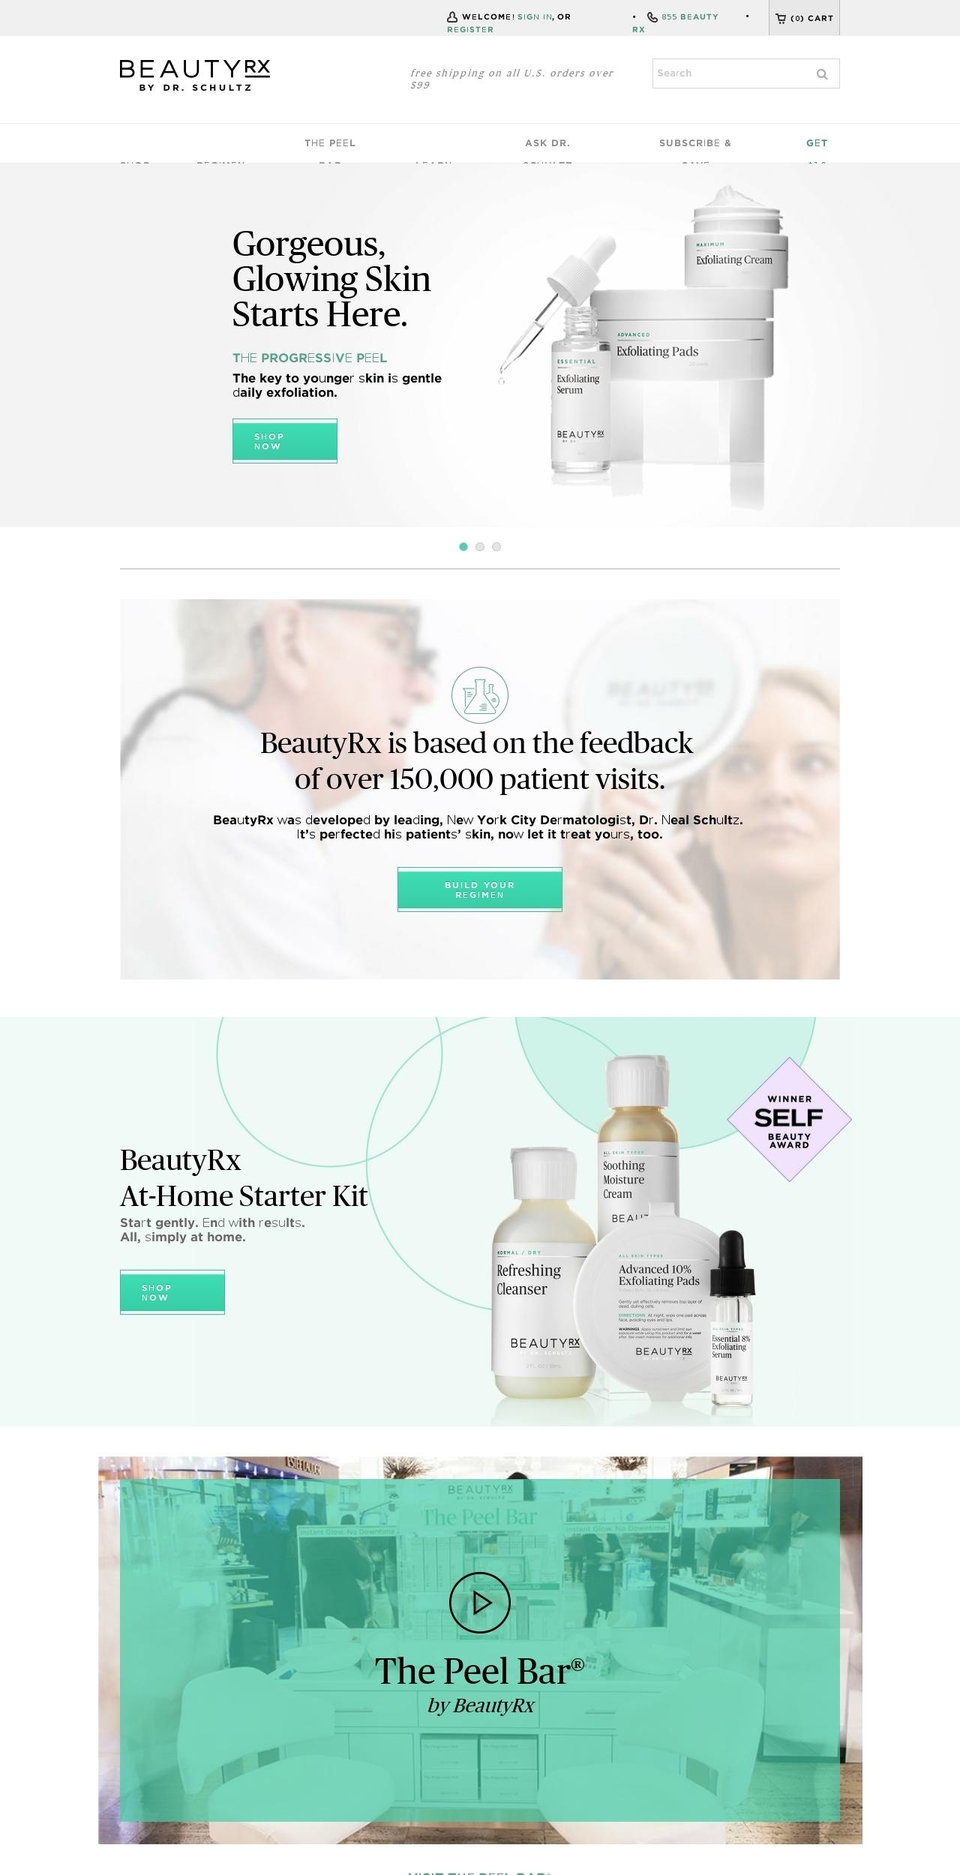 [Mob-20-Feb-18] Beauty RX [BR-248] Shopify theme site example beautyrx.org